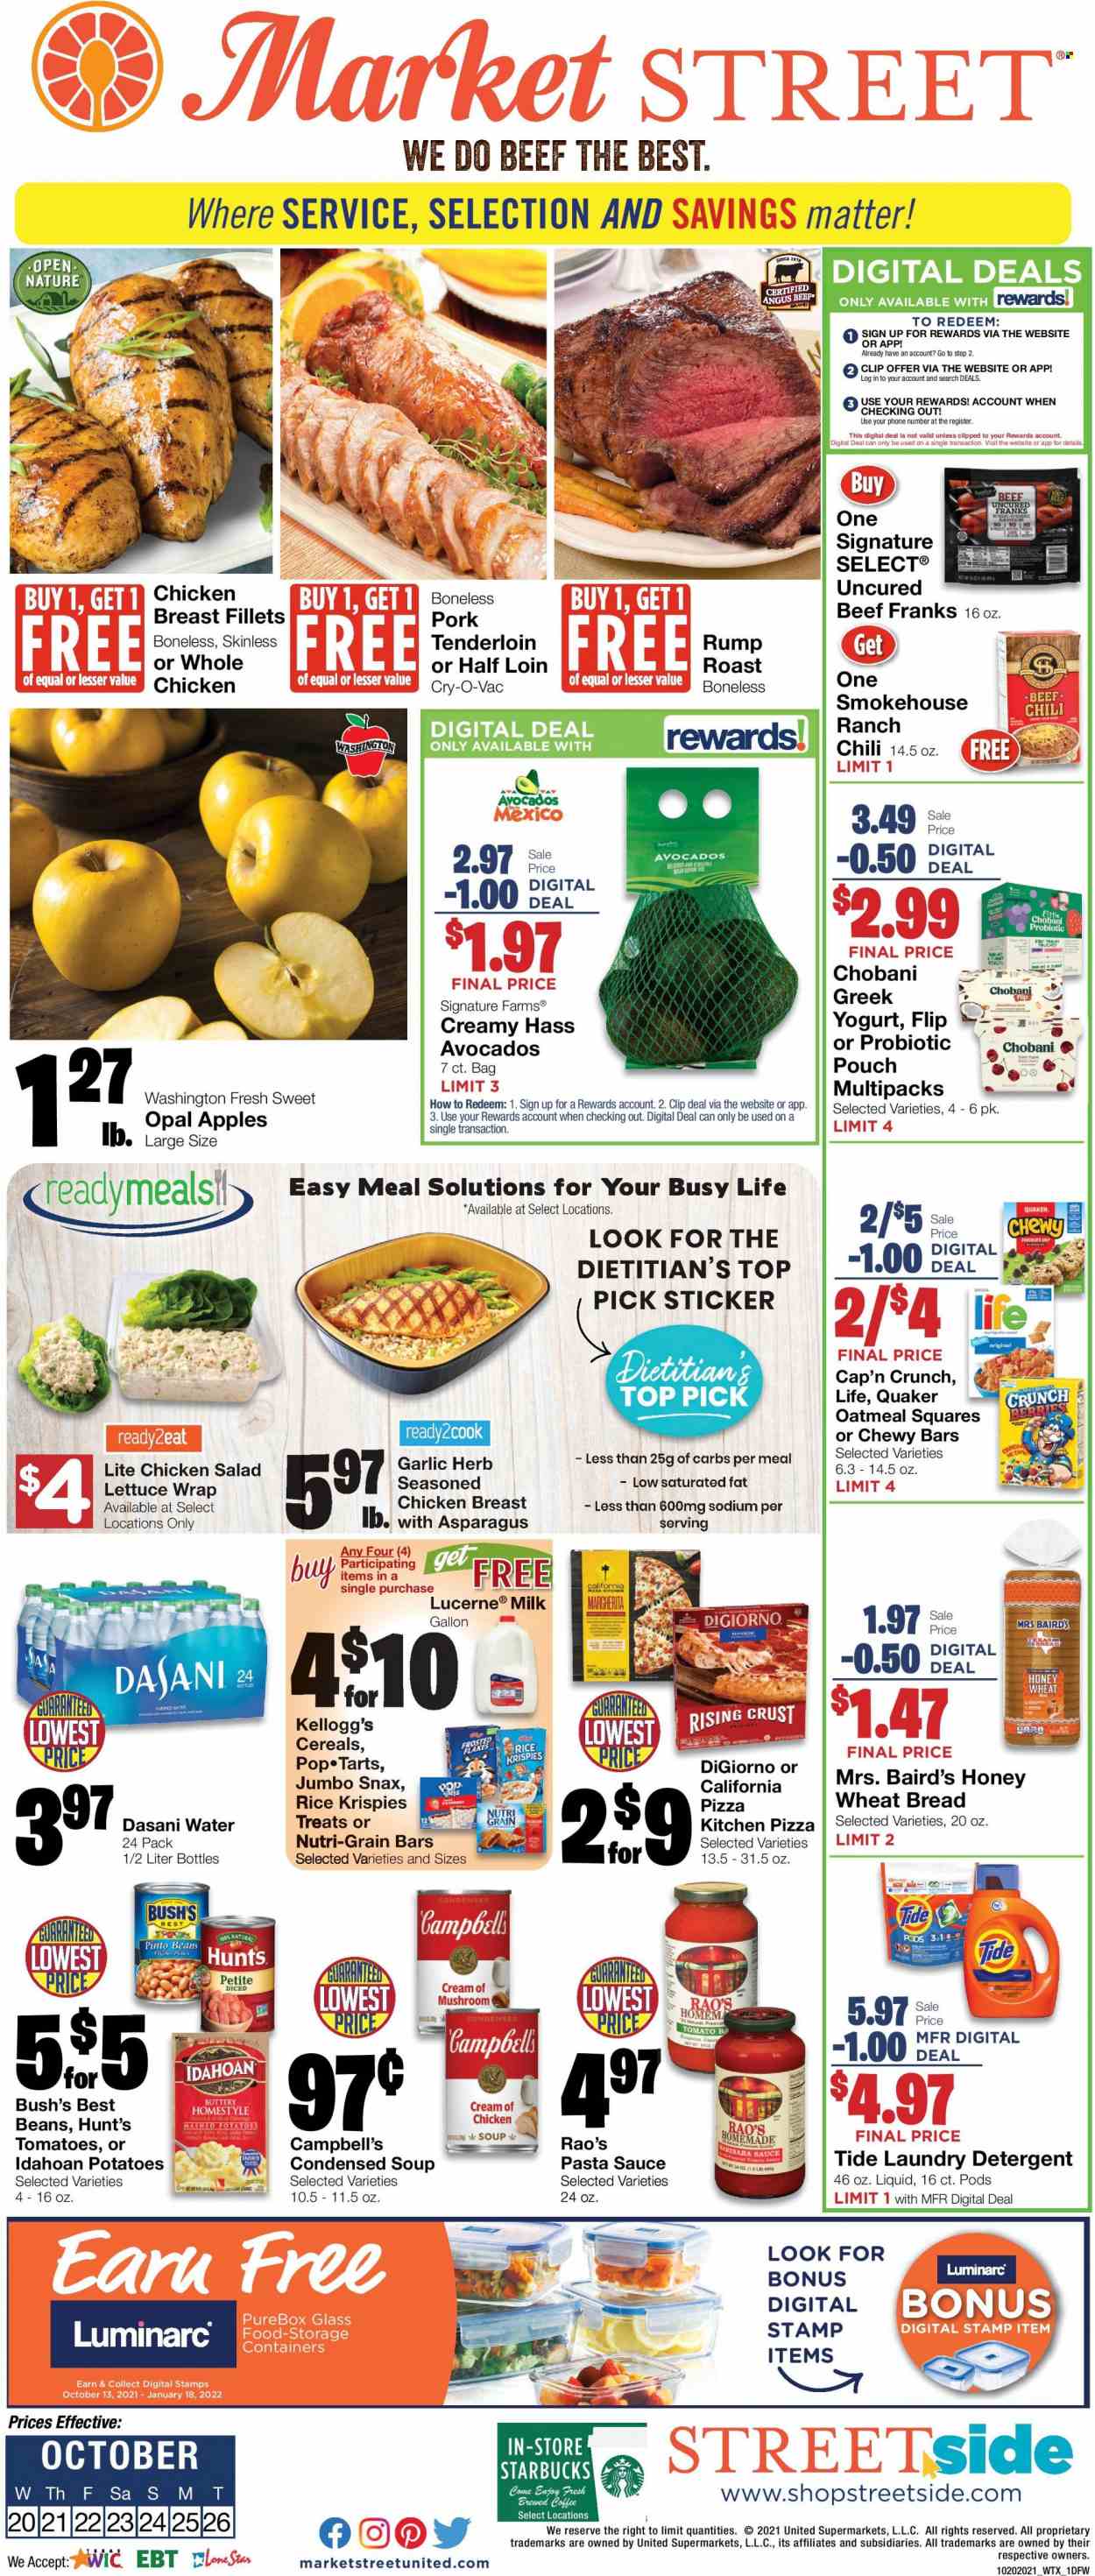 thumbnail - Market Street Flyer - 10/20/2021 - 10/26/2021 - Sales products - wheat bread, asparagus, lettuce, salad, apples, avocado, Campbell's, mashed potatoes, pizza, pasta sauce, condensed soup, soup, sauce, Quaker, instant soup, chicken salad, yoghurt, Chobani, milk, Kellogg's, Nutri-Grain bars, oatmeal, pinto beans, cereals, Rice Krispies, Cap'n Crunch, Nutri-Grain, coffee, Starbucks, chicken breasts, beef meat, pork meat, pork tenderloin, detergent, Tide, laundry detergent. Page 1.